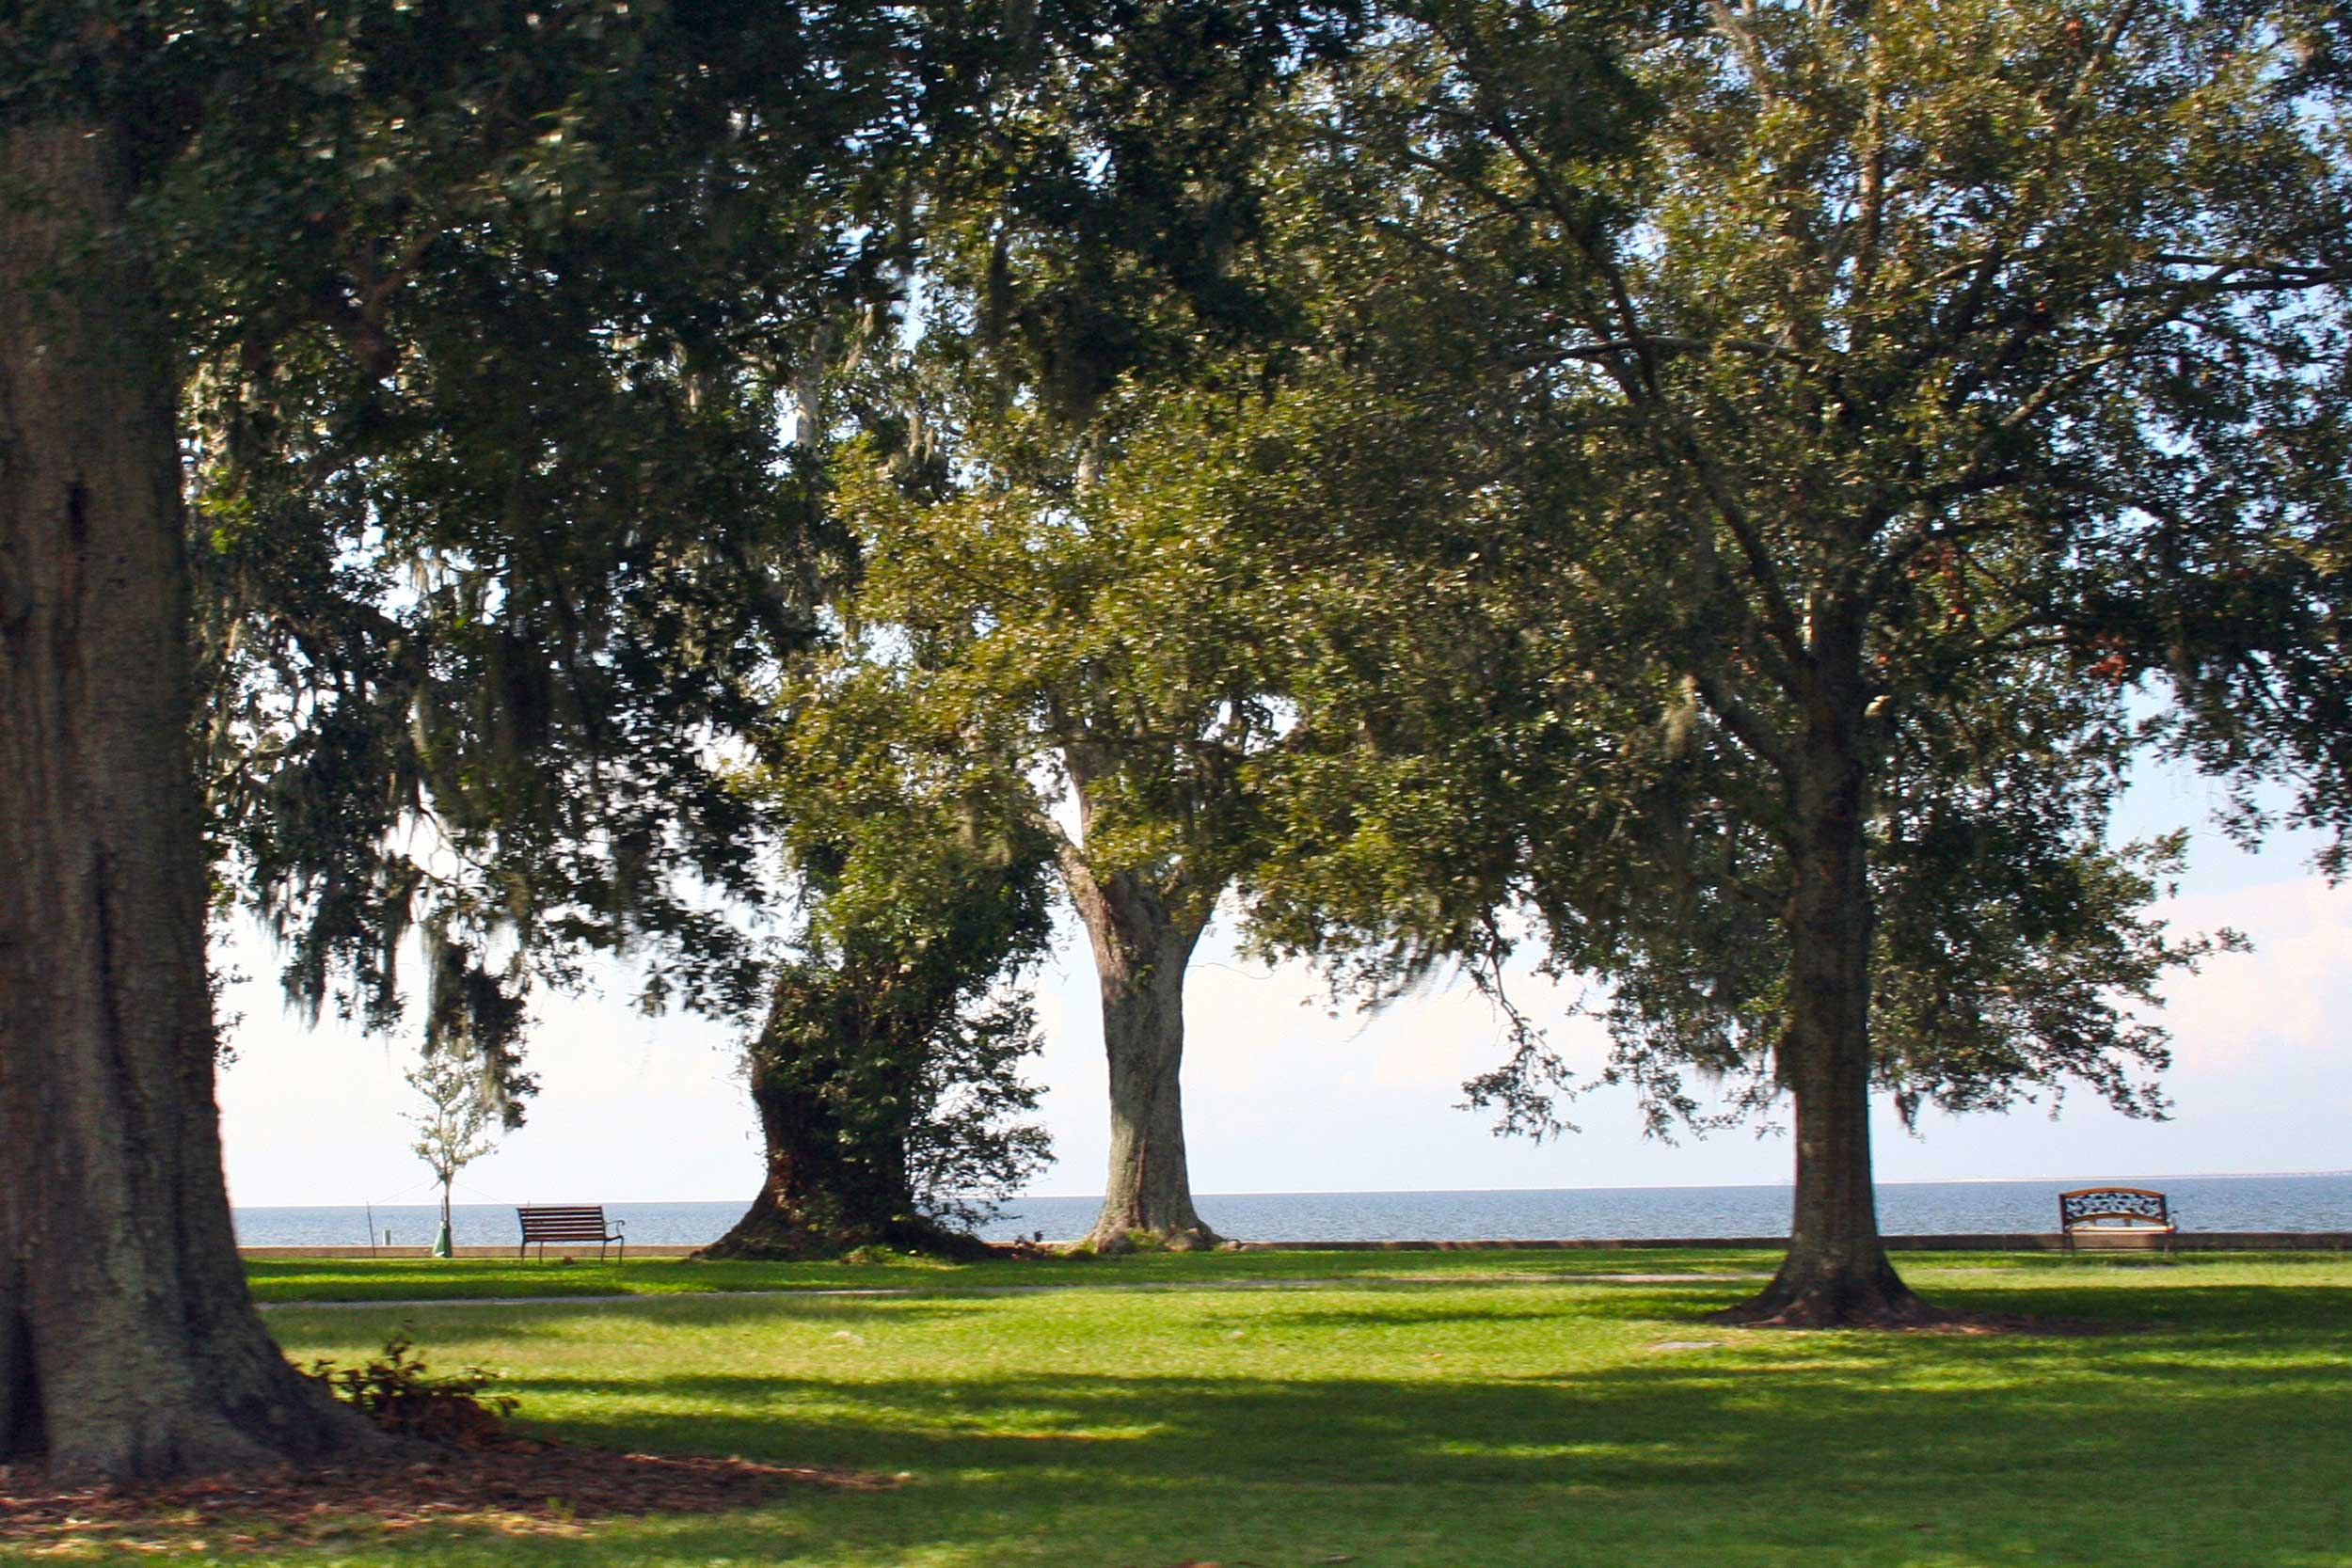 A park in St. Tammany parish in New Orleans, LA